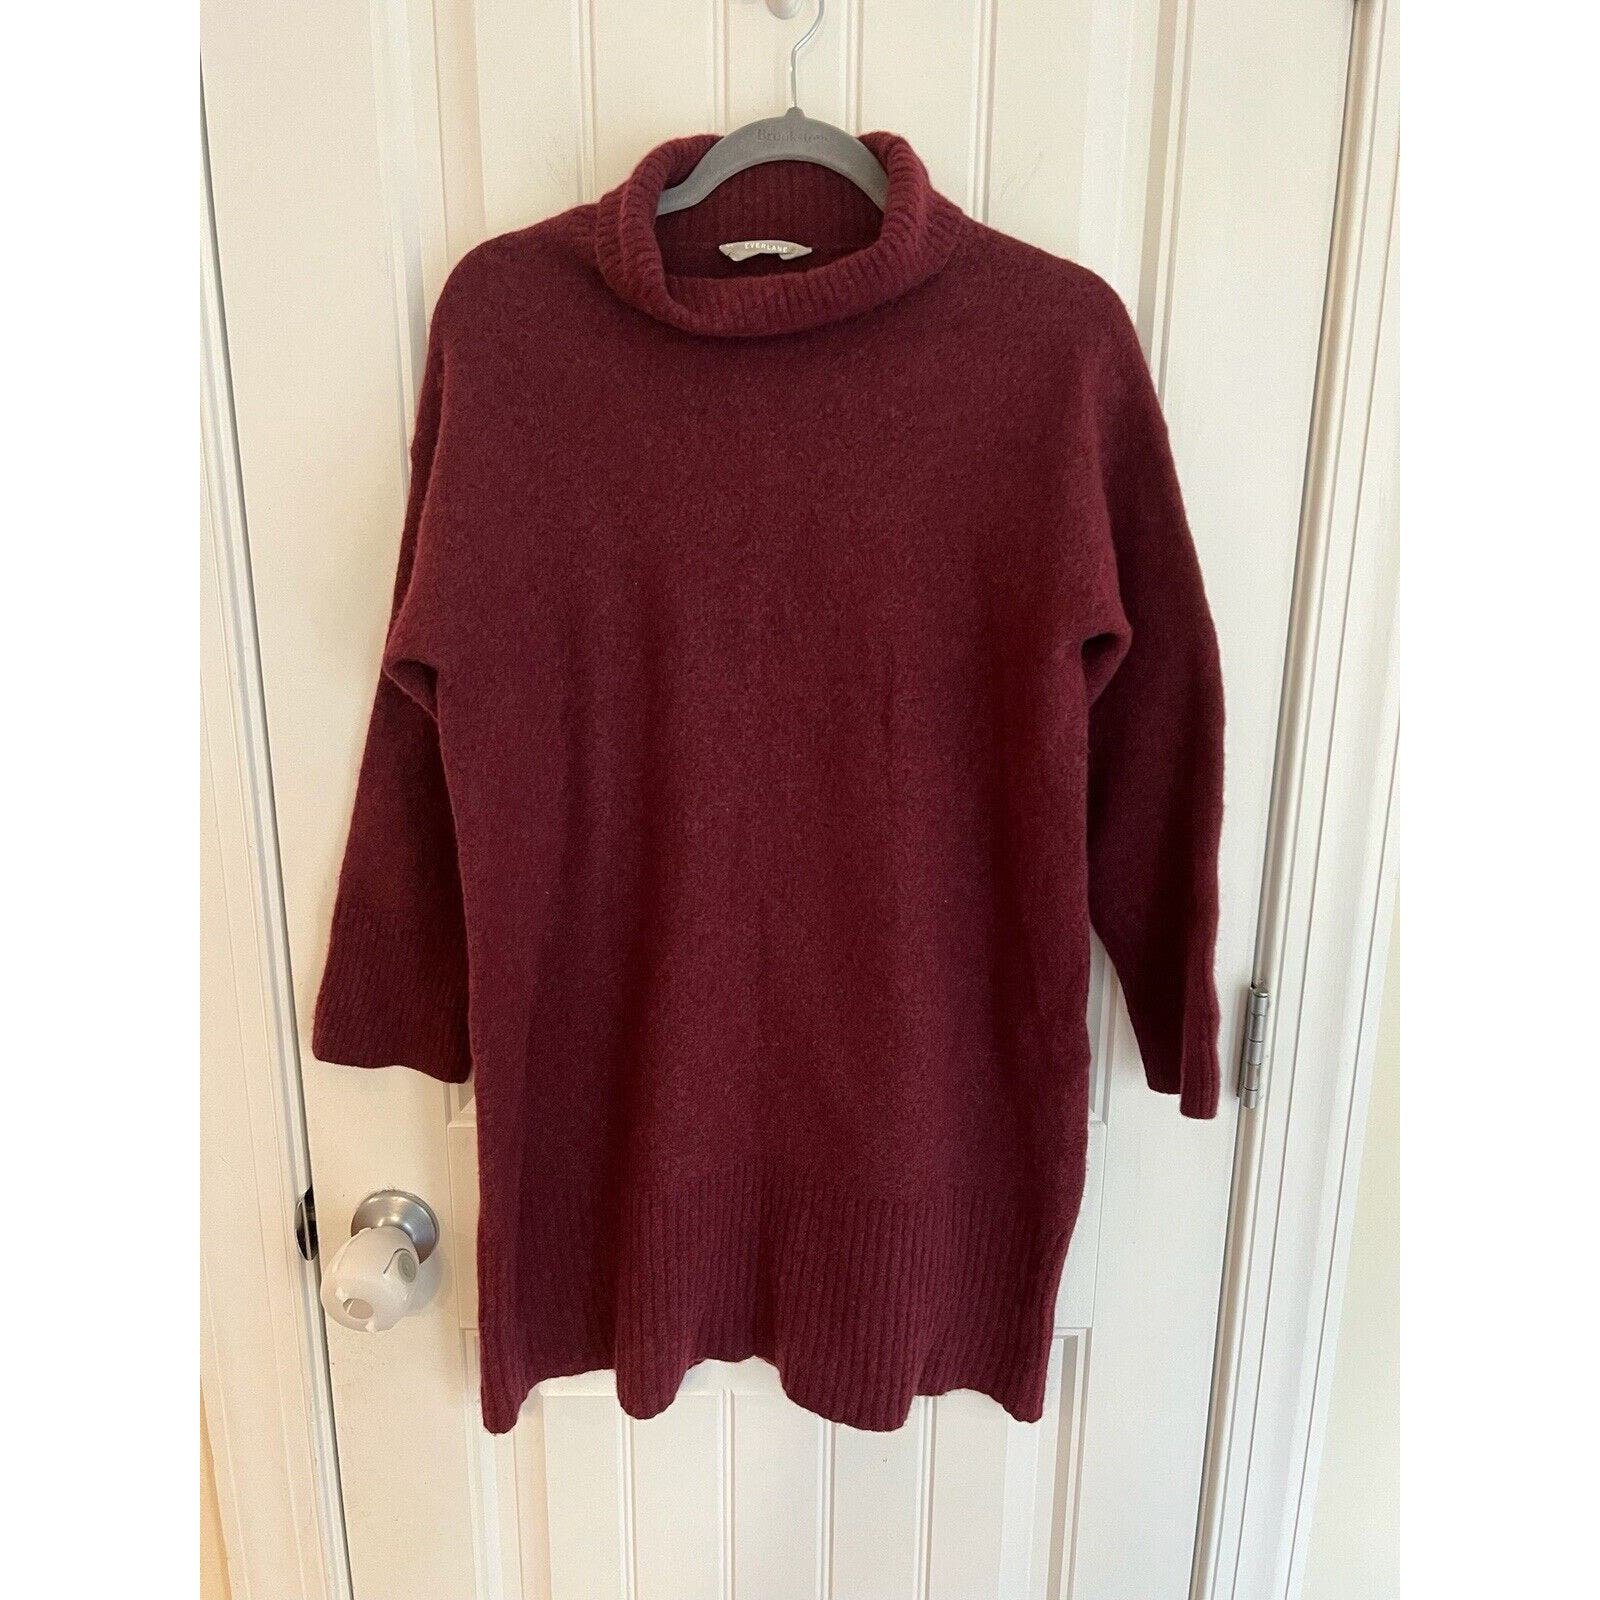 Buy Everlane The Cozy Stretch Turtleneck Sweater Wool Blend Dress Size Large NLXIvZKFa Hot Sale